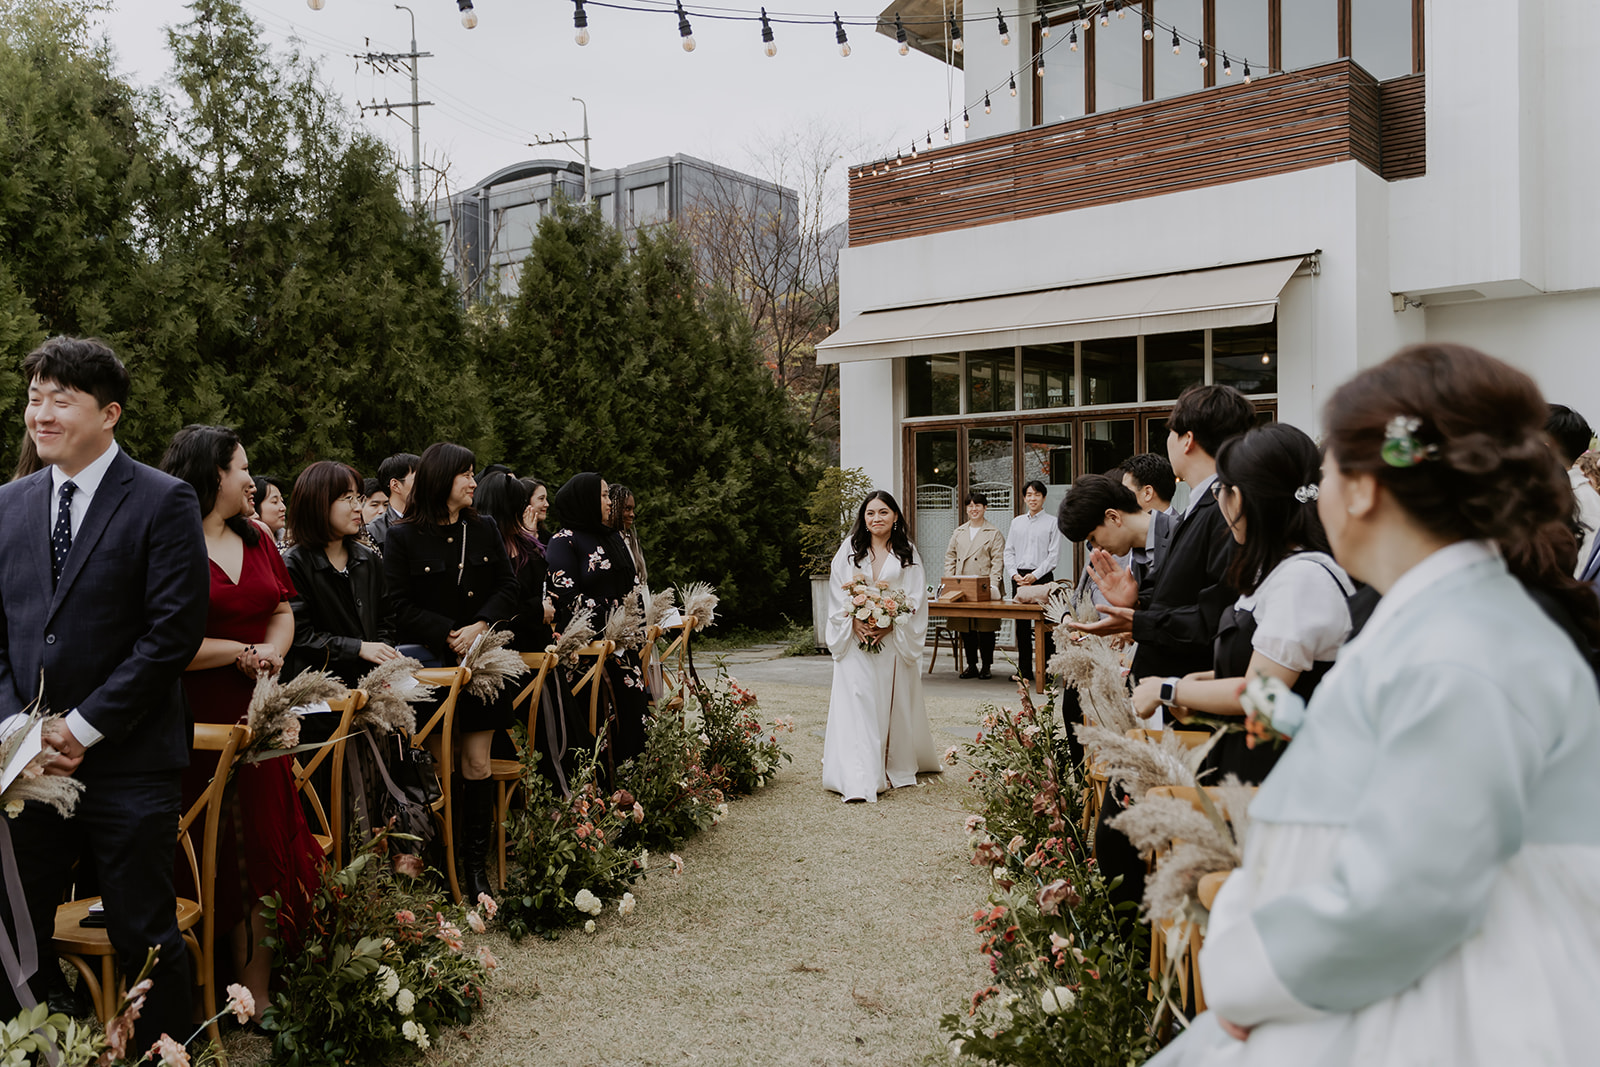 A bride walks down the aisle at an outdoor wedding ceremony, with guests lined up on either side, watching attentively.